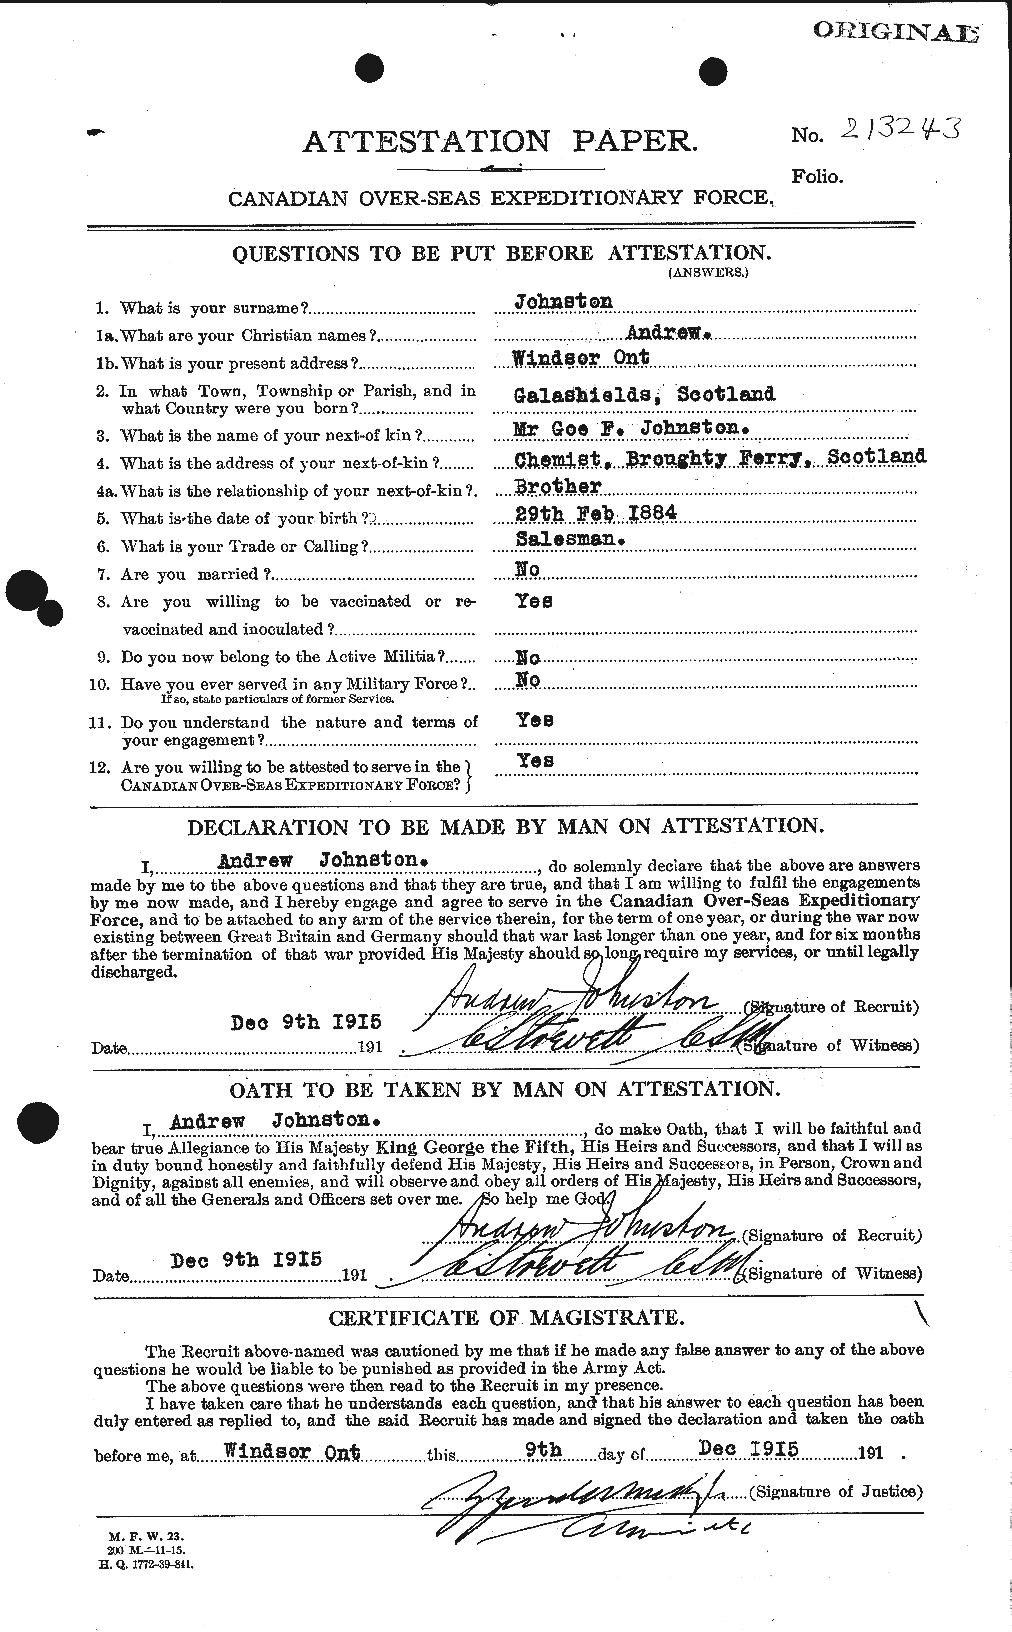 Personnel Records of the First World War - CEF 421010a